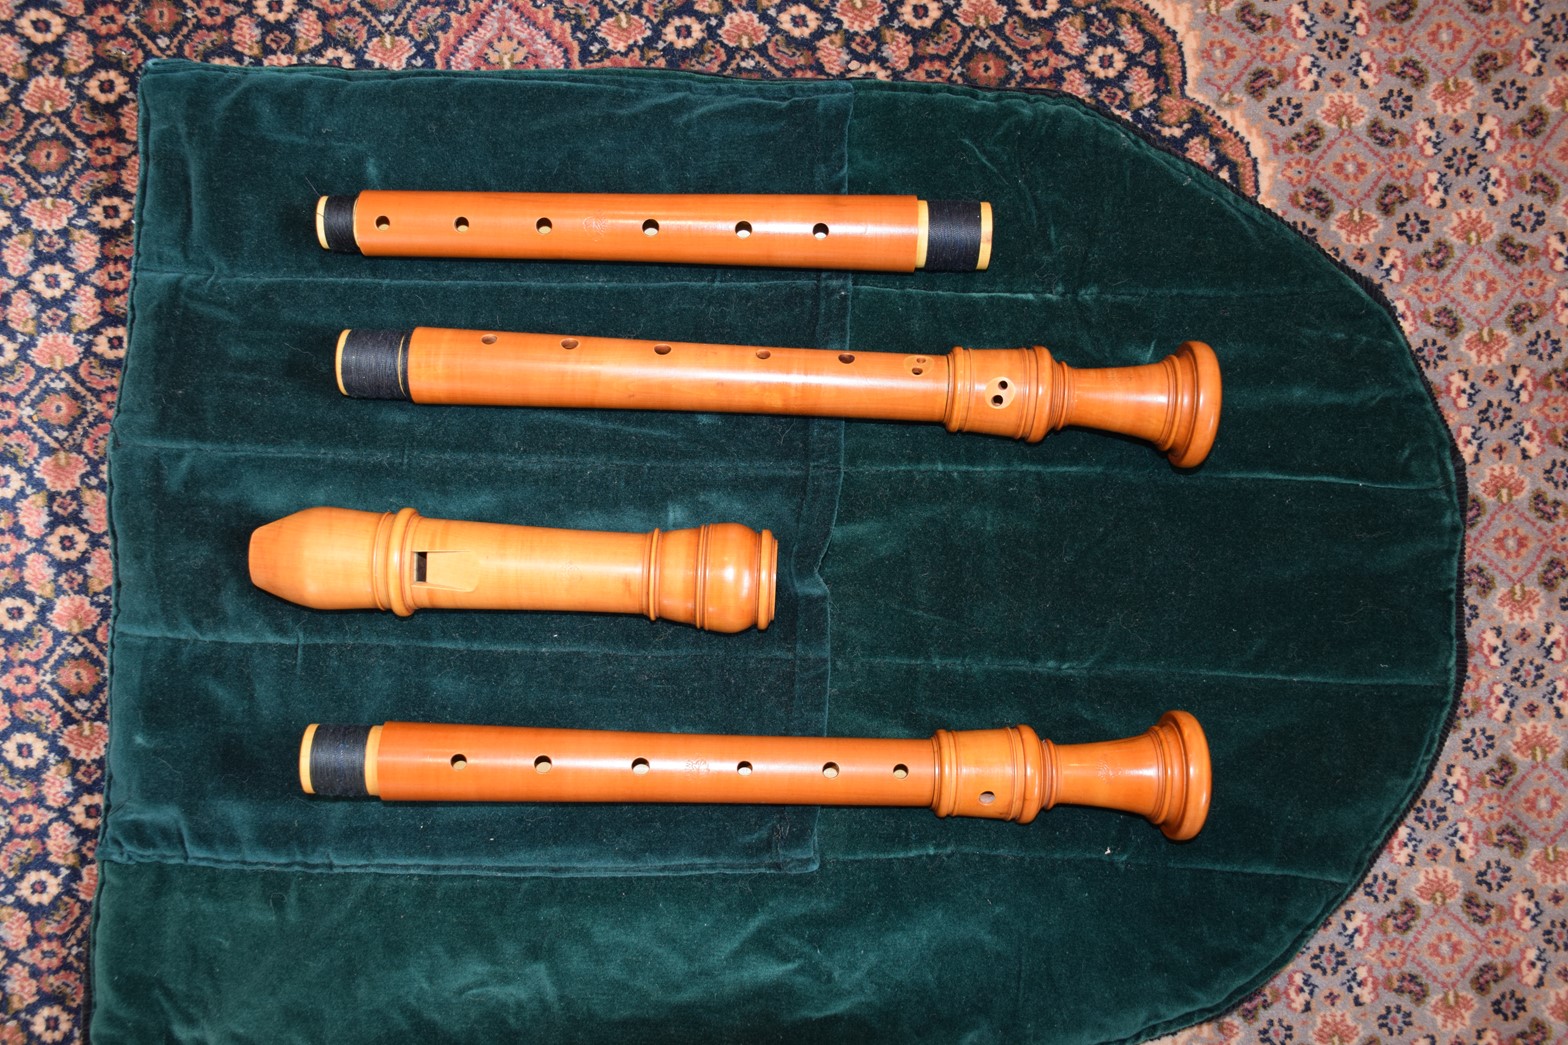 undefinedAlto: Michael Grinter - boxwood, 3 middle joints, 2 food joints, double holes/modern fingering and single holes/orig. fingering. Pitch = 407/415